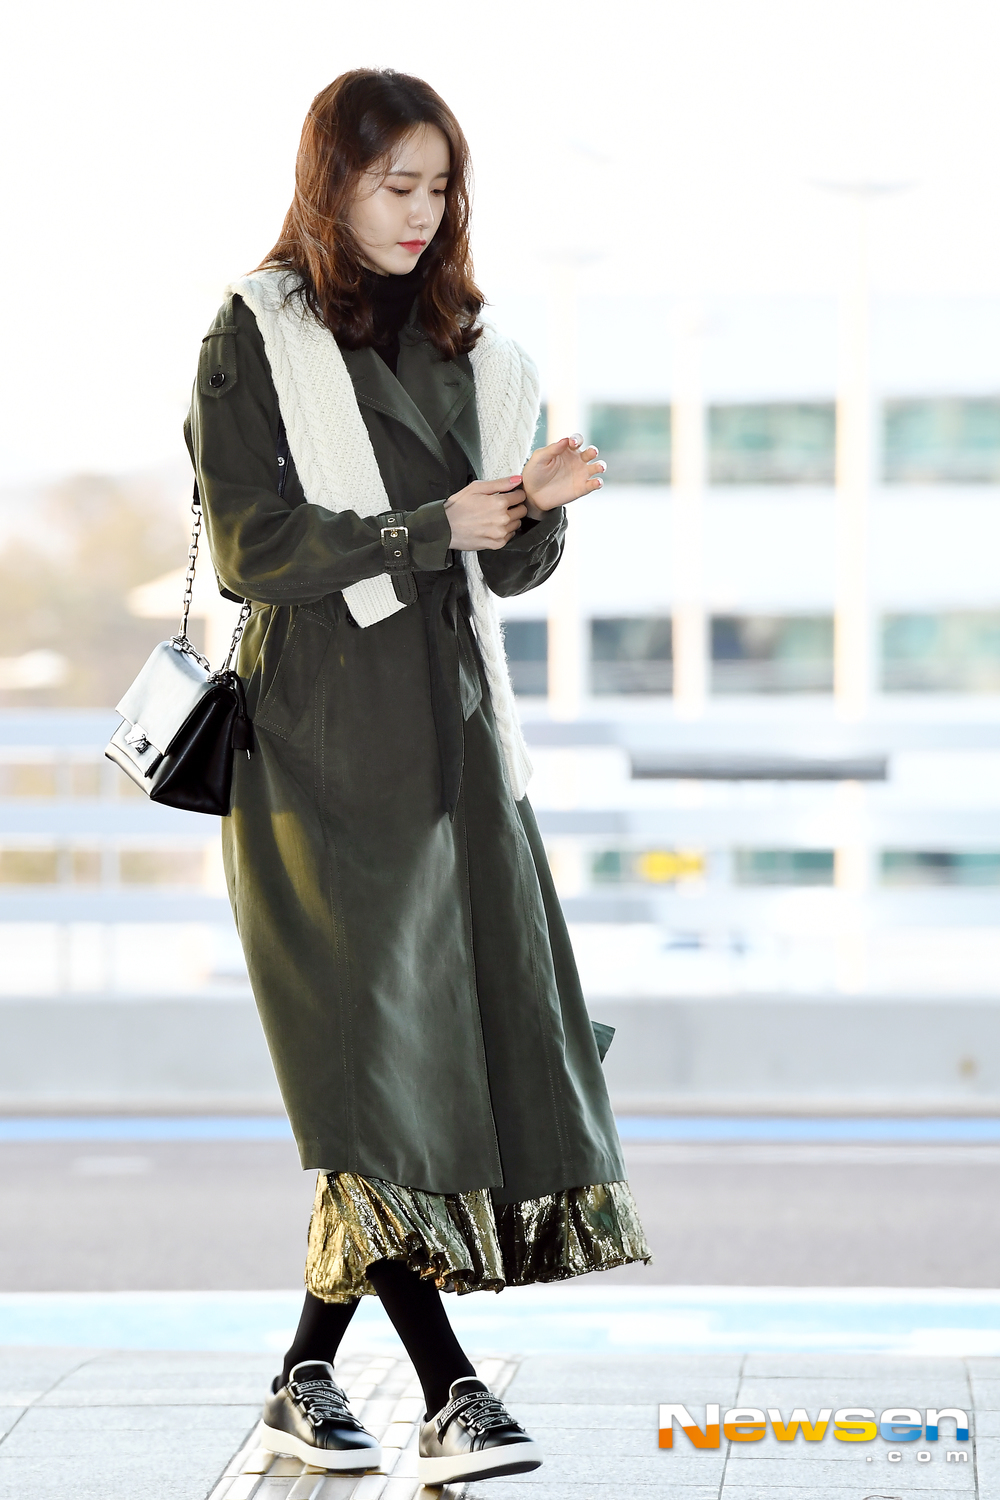 <p>Girls Generation(SNSD) member and an actor Im Yoon-ah 2 11 PM Incheon Jung-operation in Incheon International Airport through the New York Collections, attend Car New York, USA as departure.</p><p>Girls Generation(SNSD) member and an actor Im Yoon-ah airport fashion and New York as departure.</p>